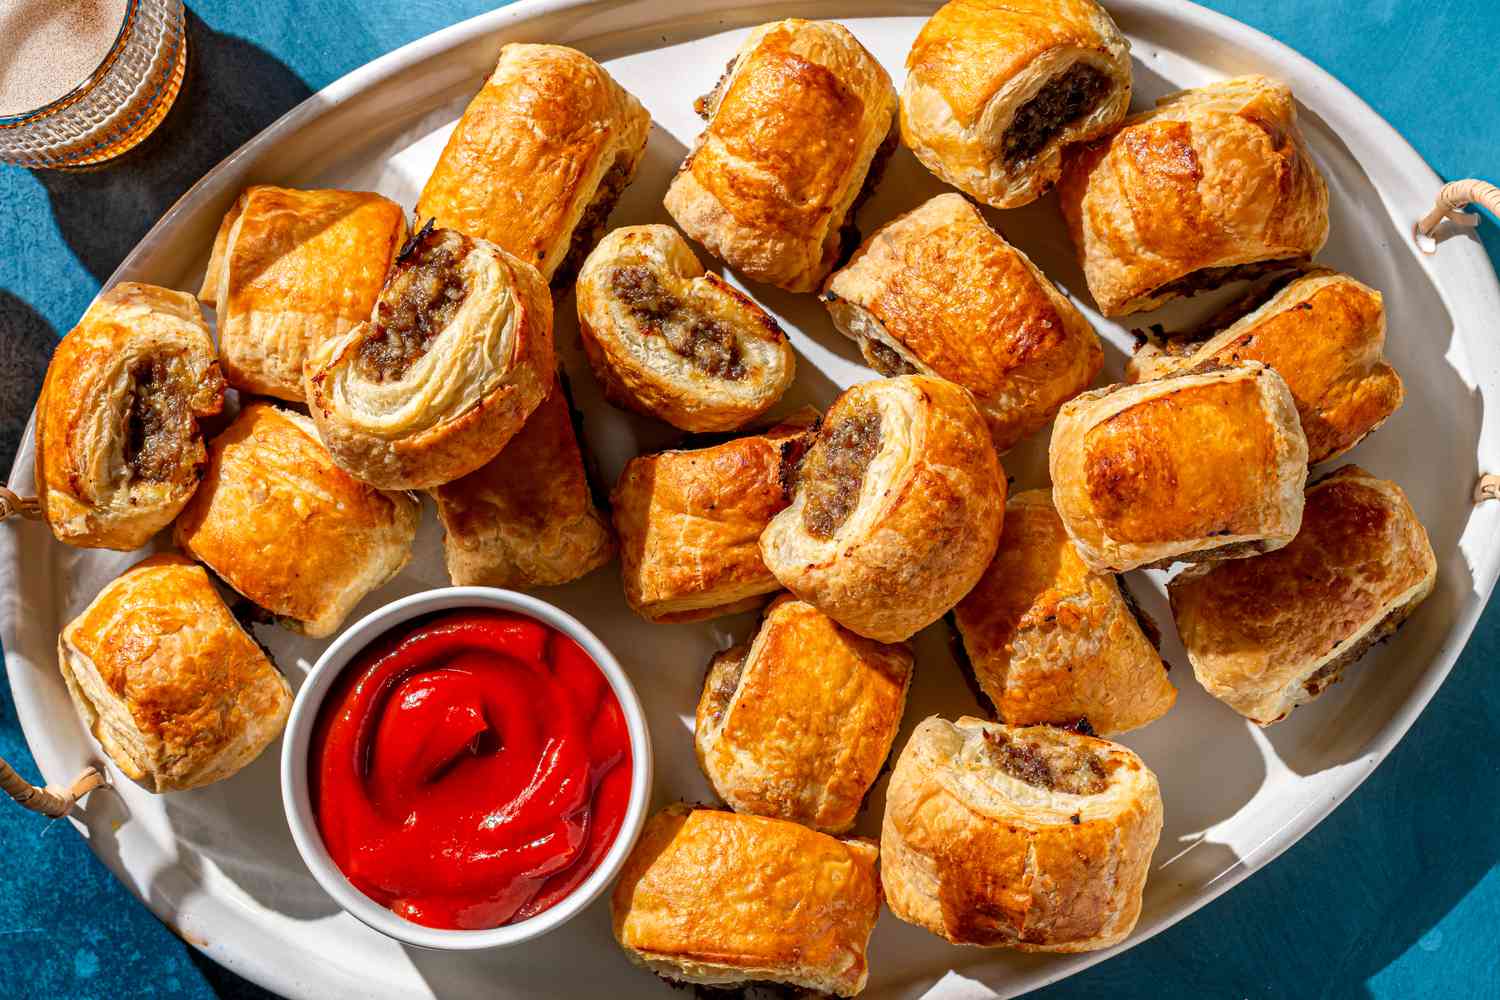 An assortment of sausage rolls, including classic, cheese and herb, and spicy variations, displayed on a rustic table.